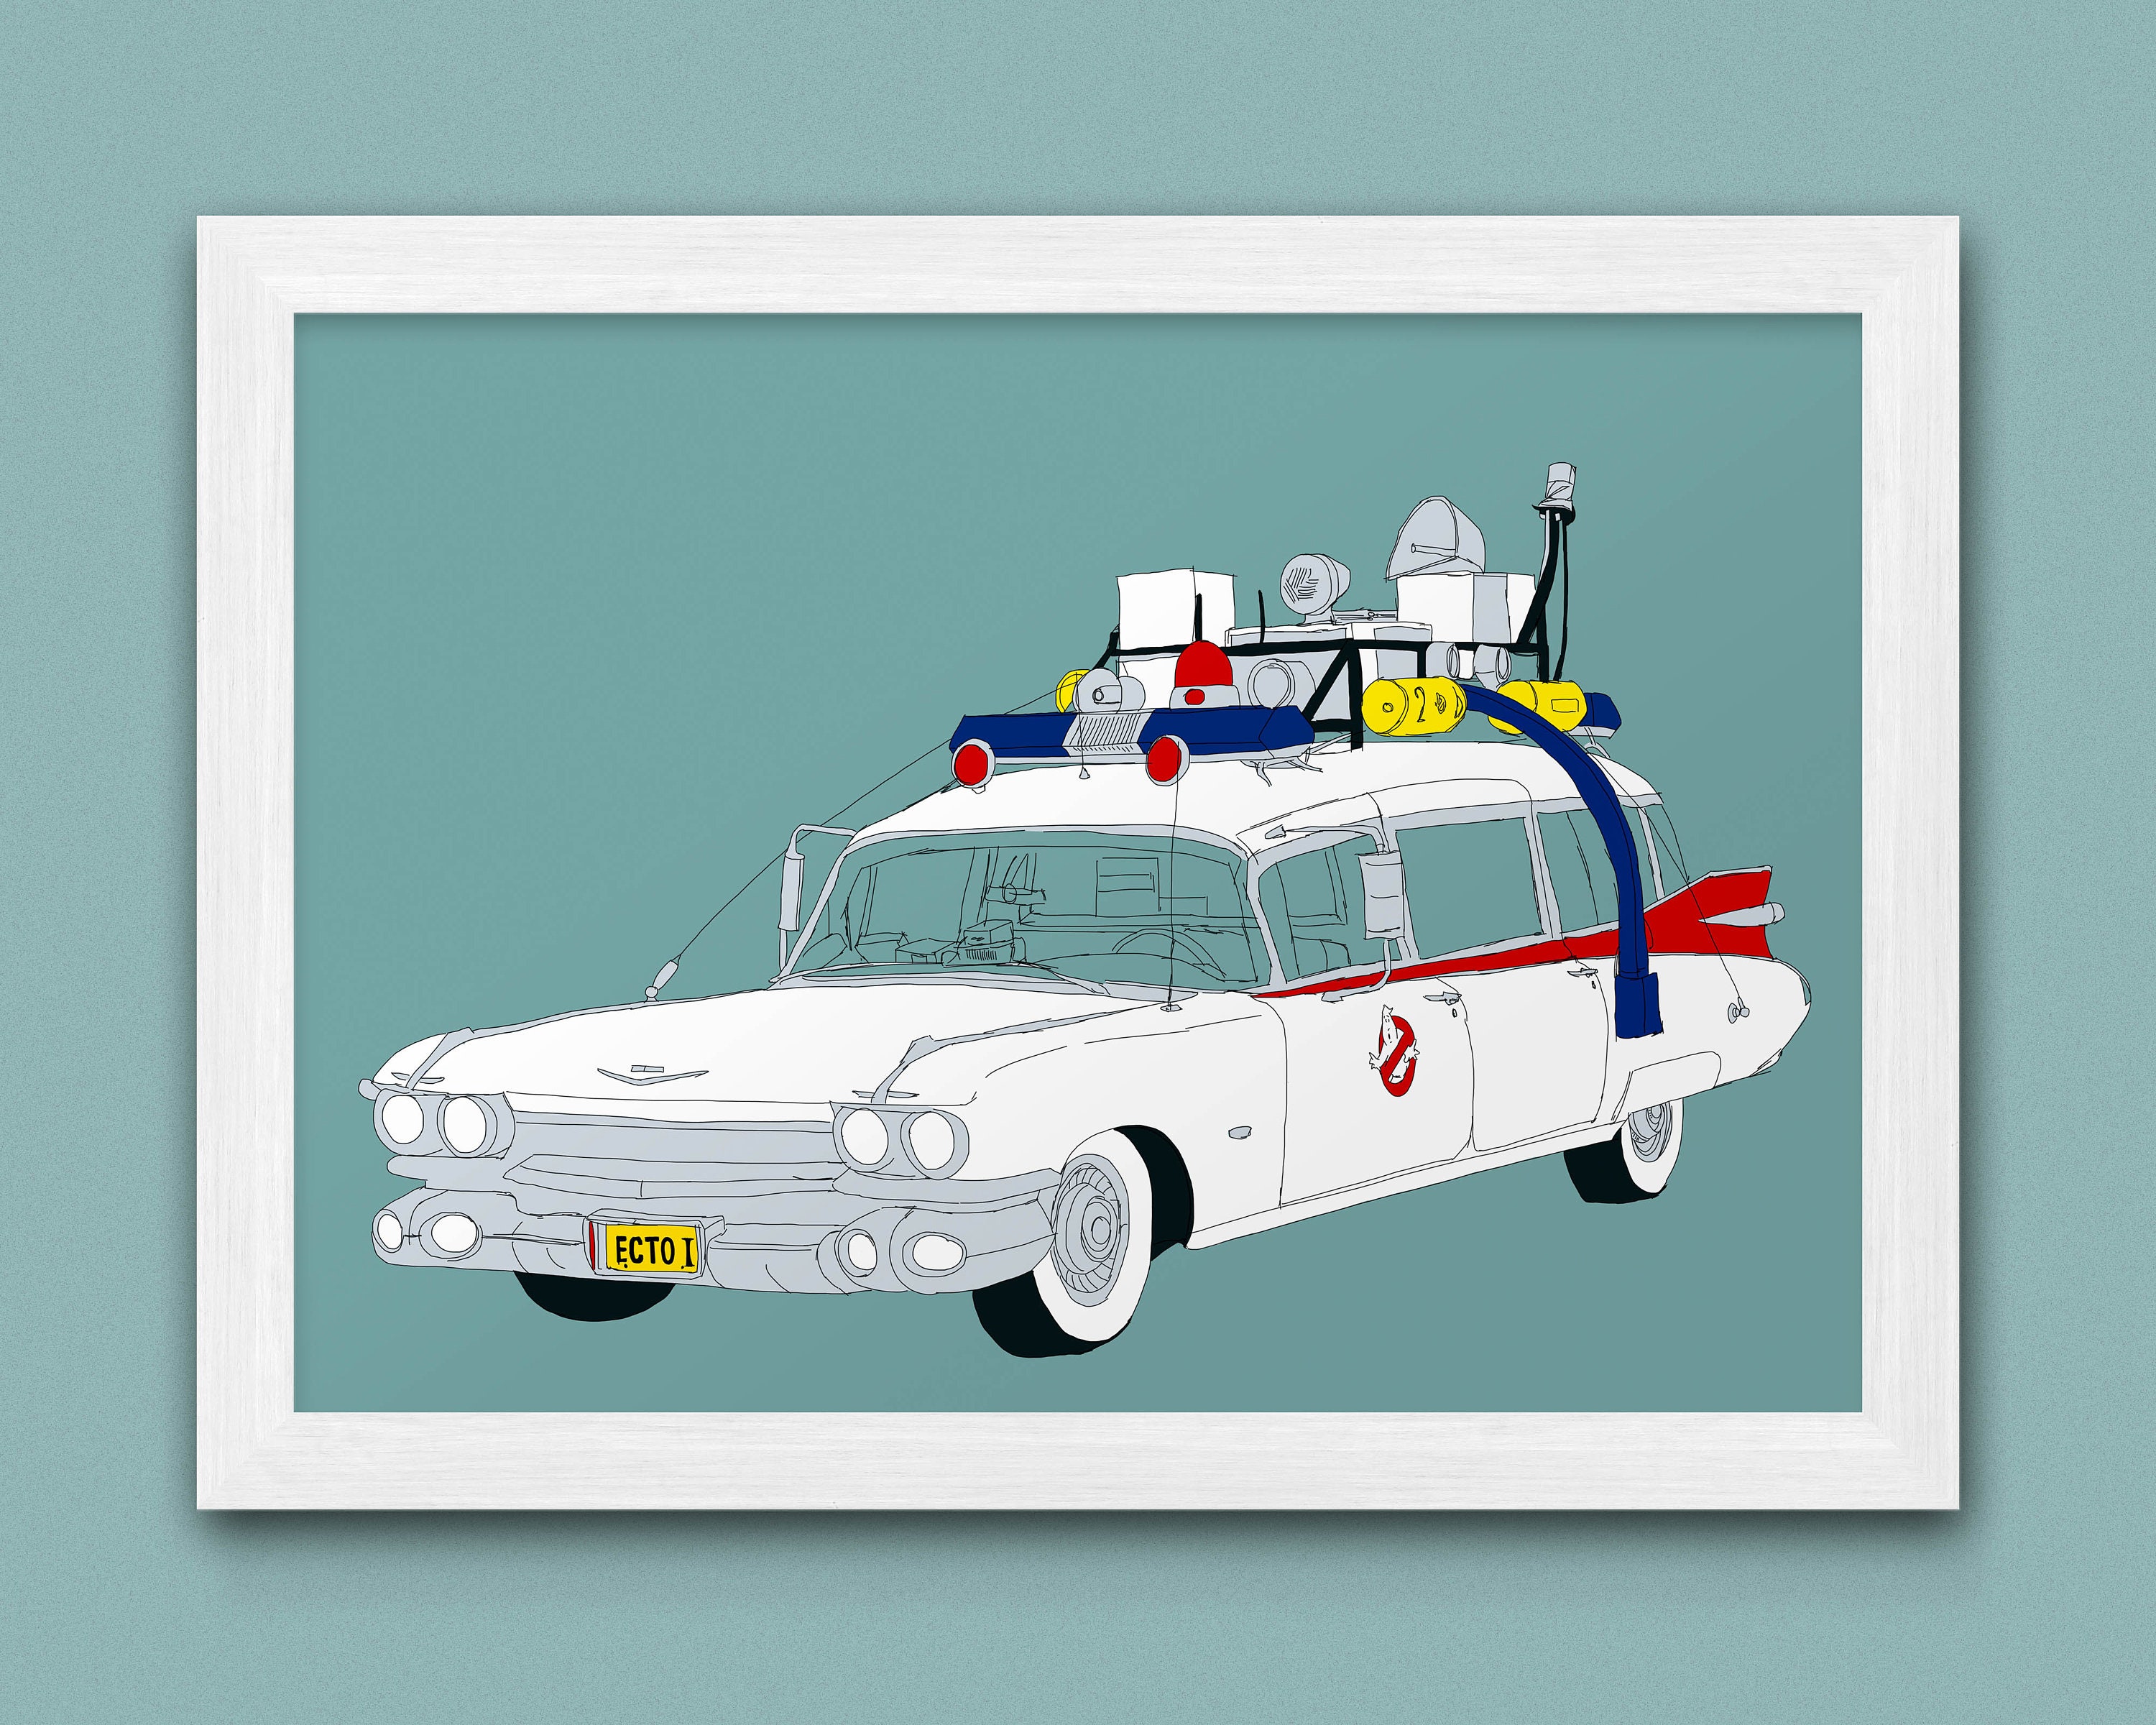 Vintage Reproduction Racing Poster Ghostbusters Ecto 1 Ambulance